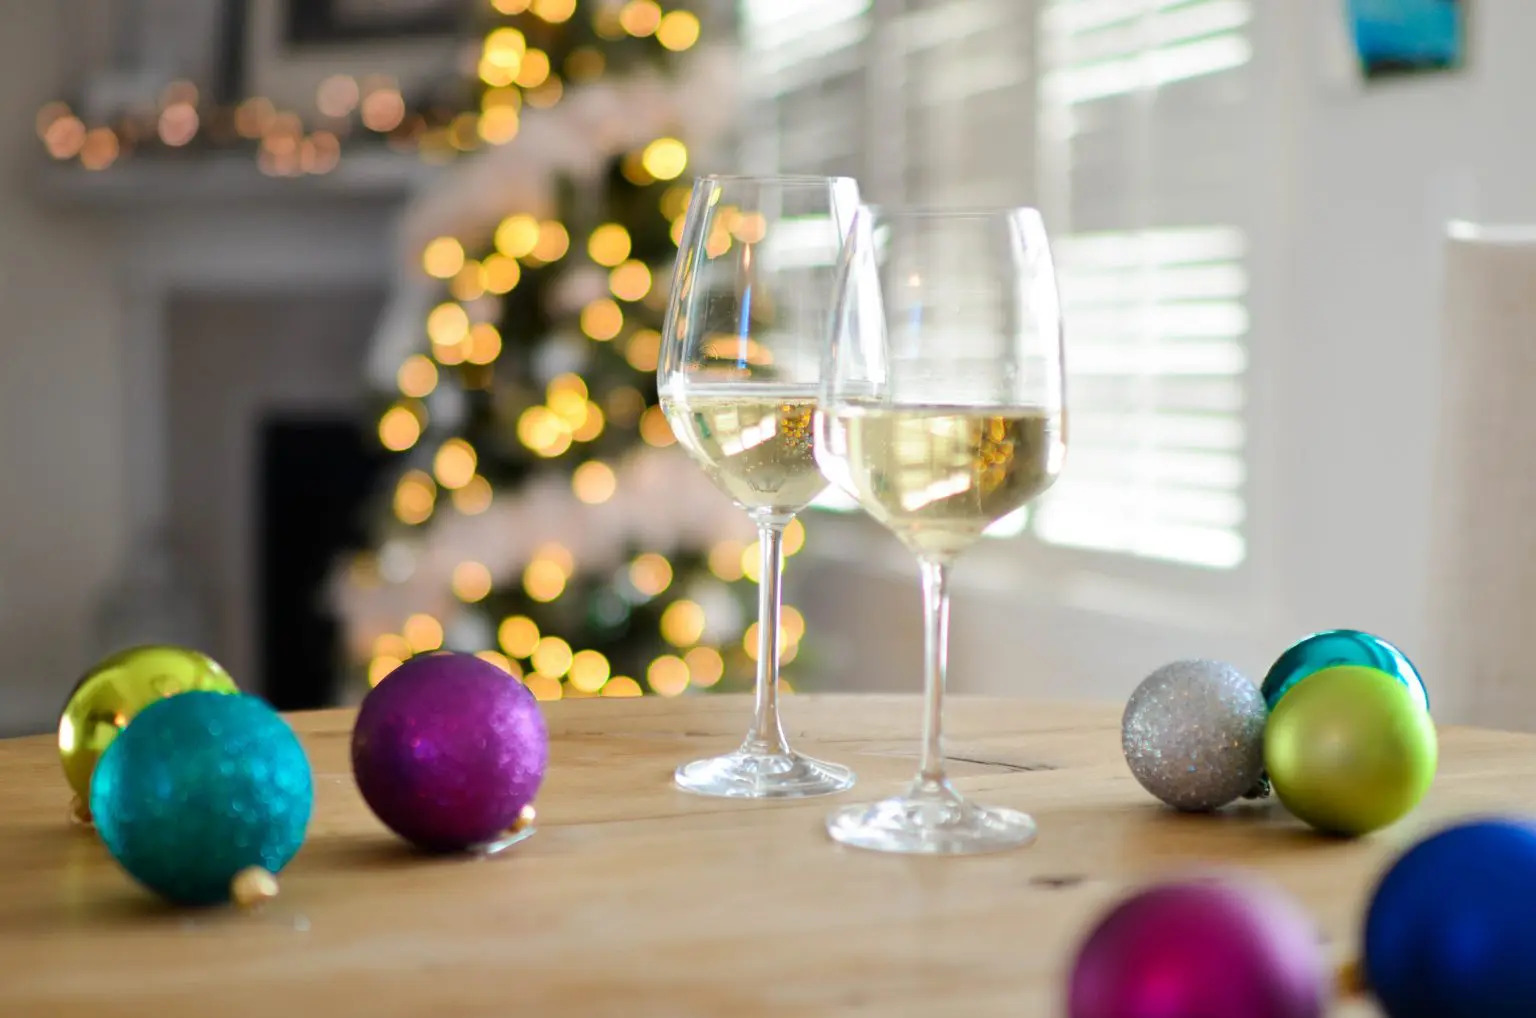 Two glasses of white wine on a table in front of a Christmas Tree